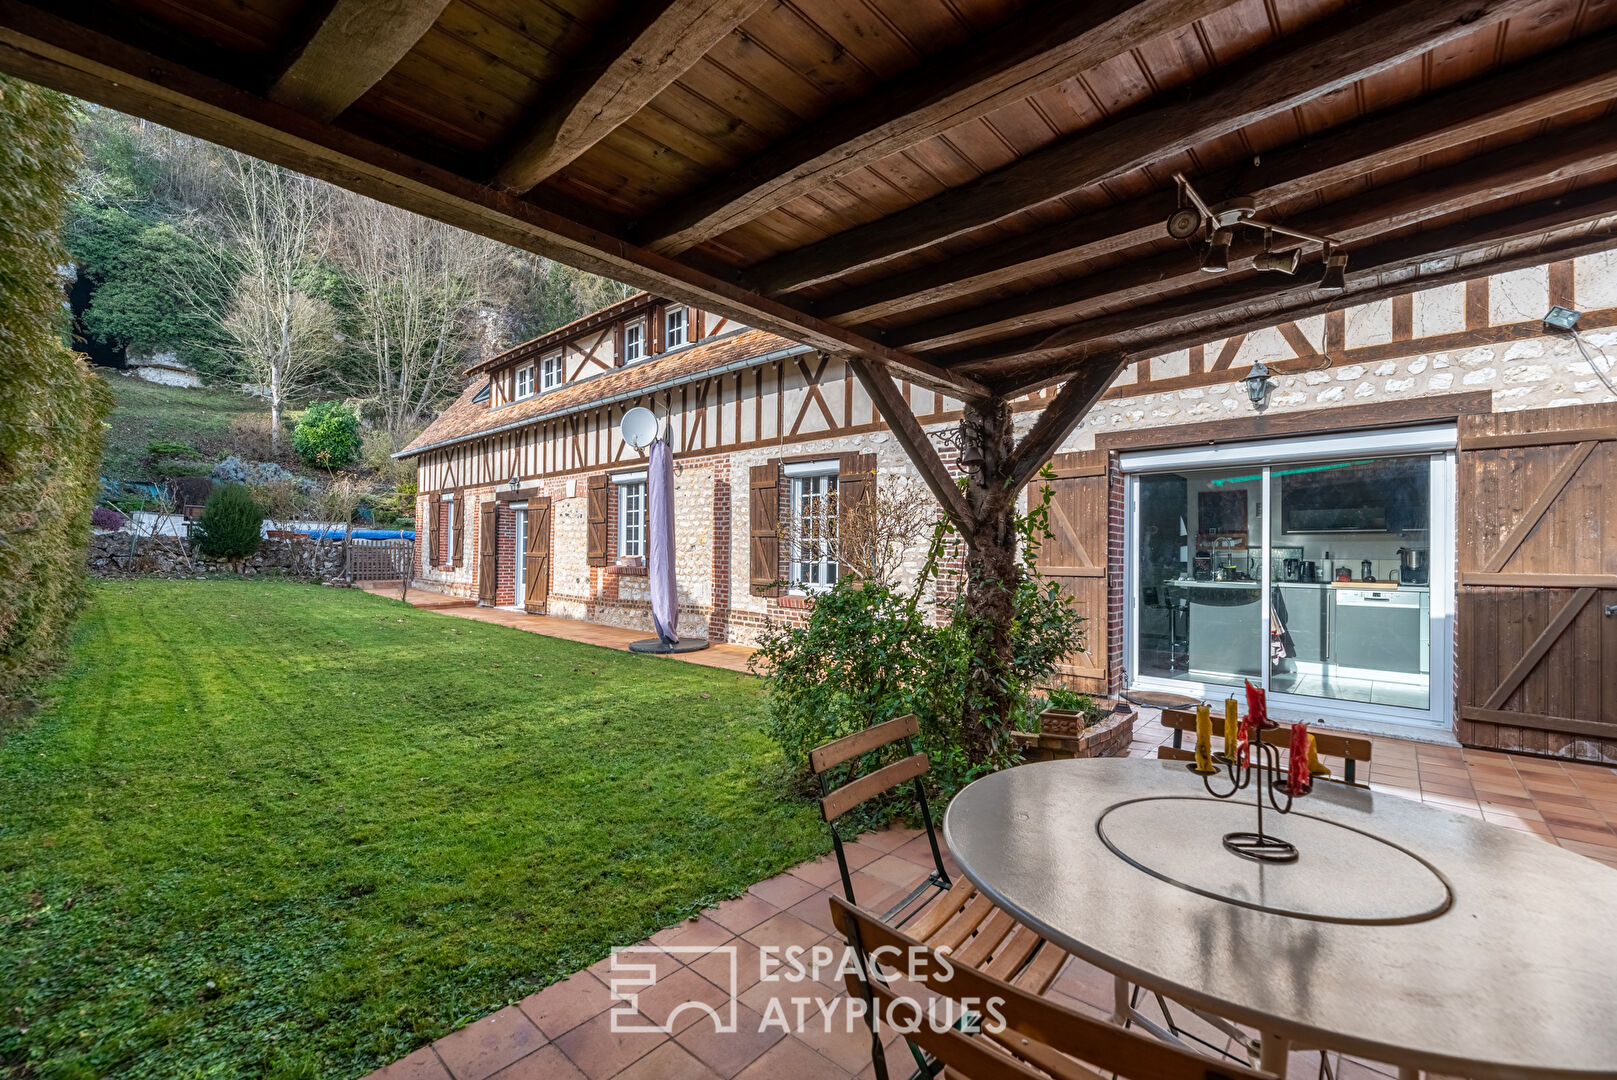 Elegant 1901 farmhouse in the heart of the Iton Valley